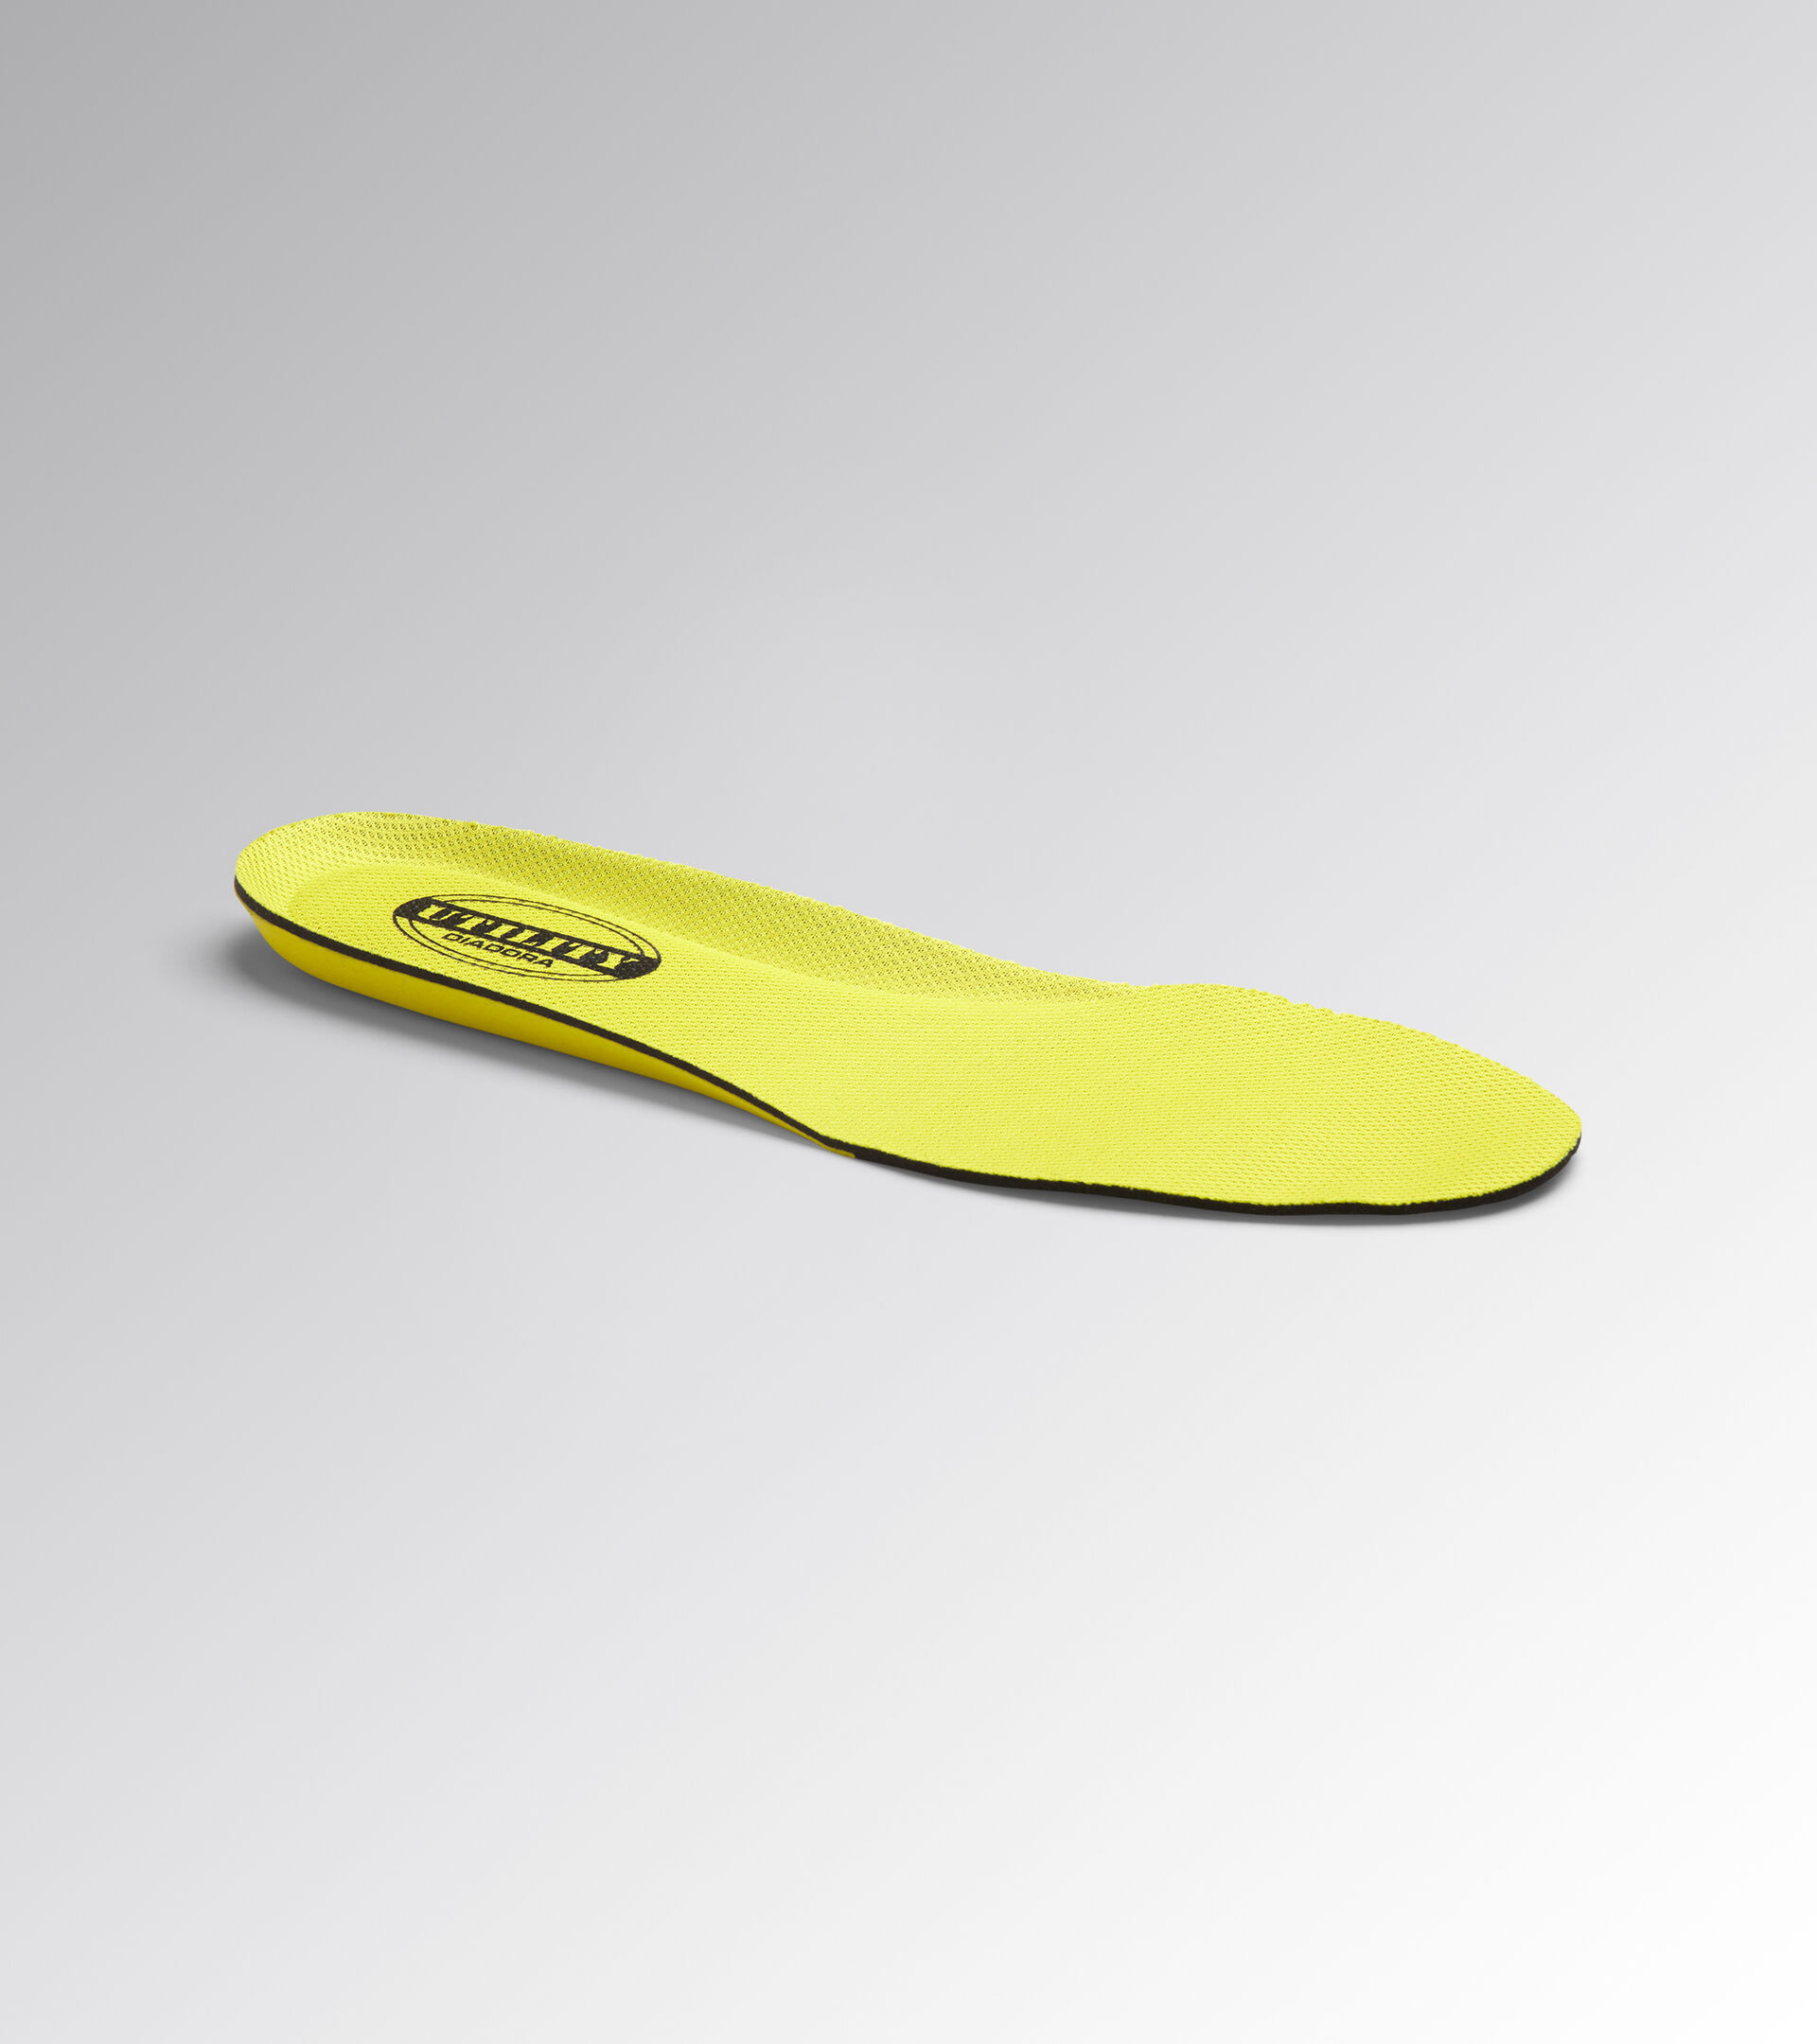 Insoles for Utility shoes INSOLE PU SMART YELLOW UTILITY/BLACK - Utility